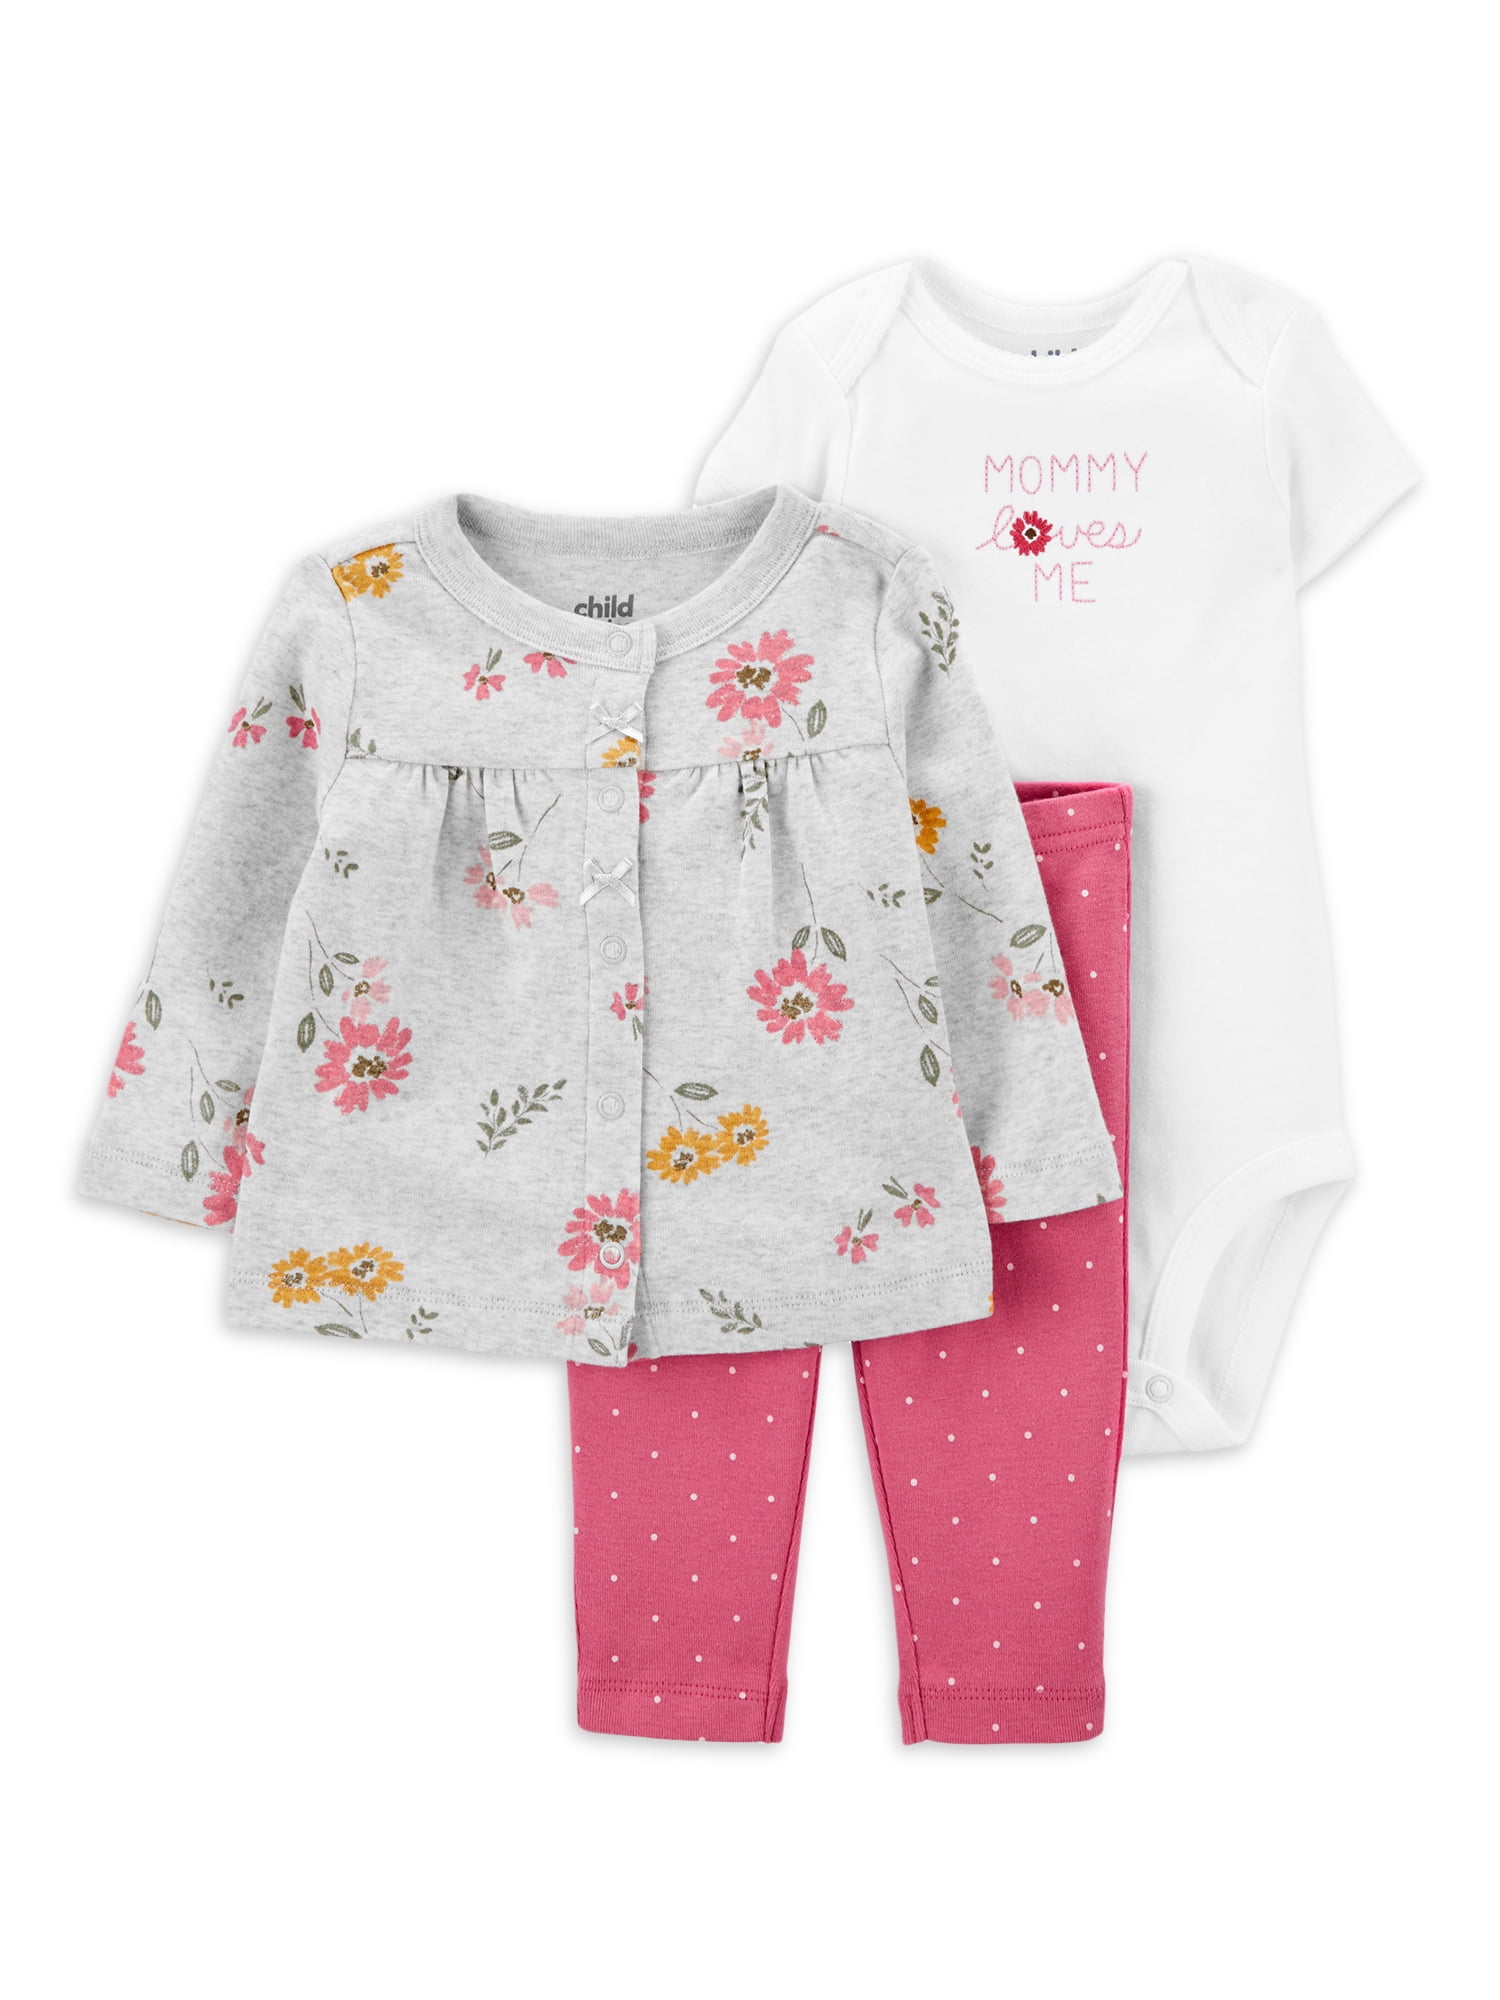 Carter's Child of Mine Baby Girls Take Me Home Floral Cardigan Set, Sizes Preemie-9 Months